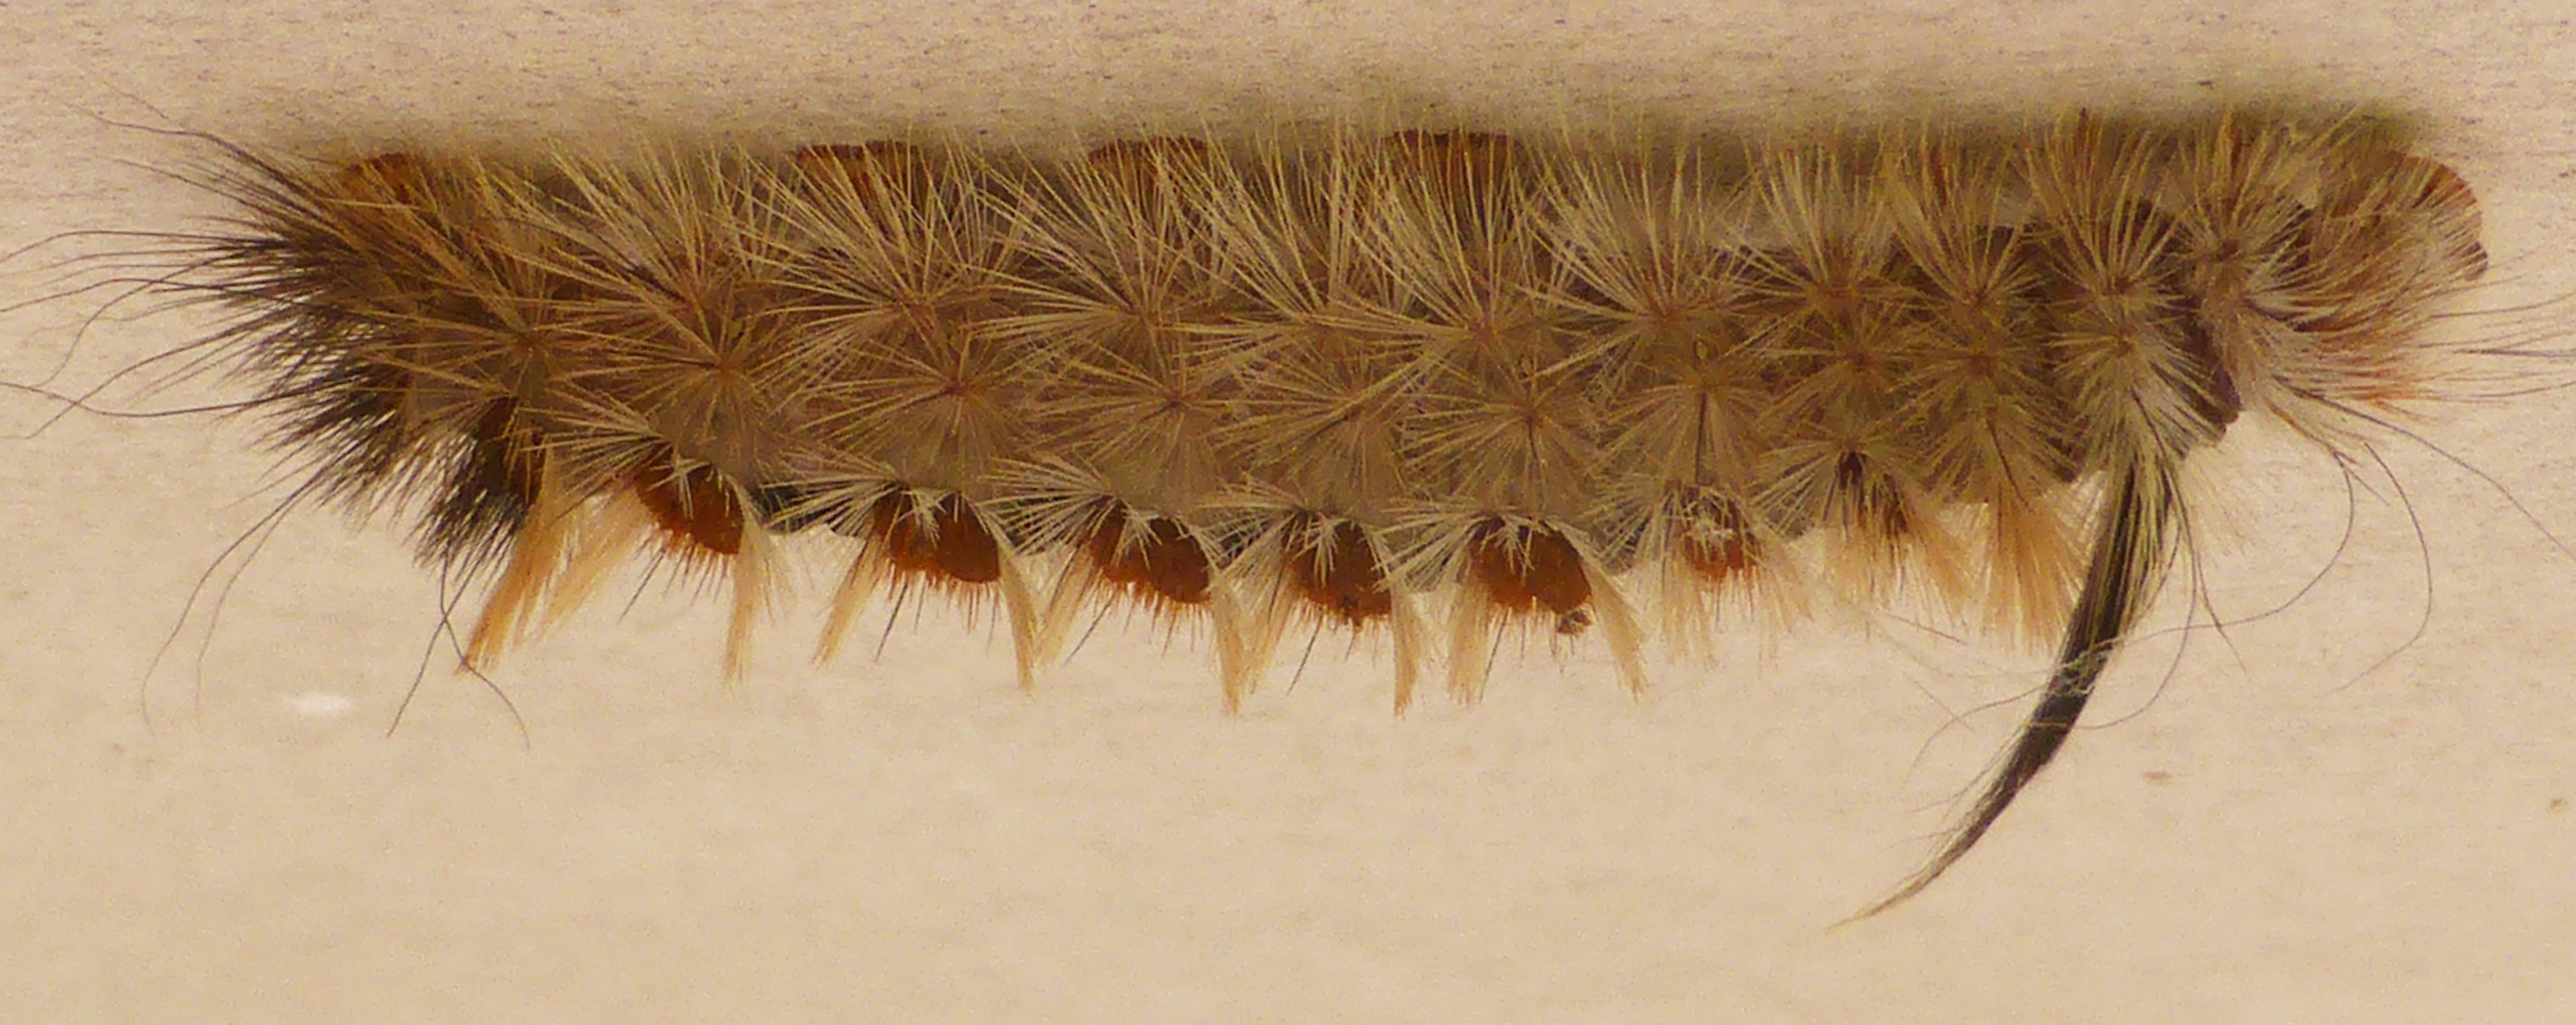 http://enviroed4all.com.au/wp-content/uploads/2016/09/Sparshalls-Moth-on-ceiling-fullP1130976.jpg